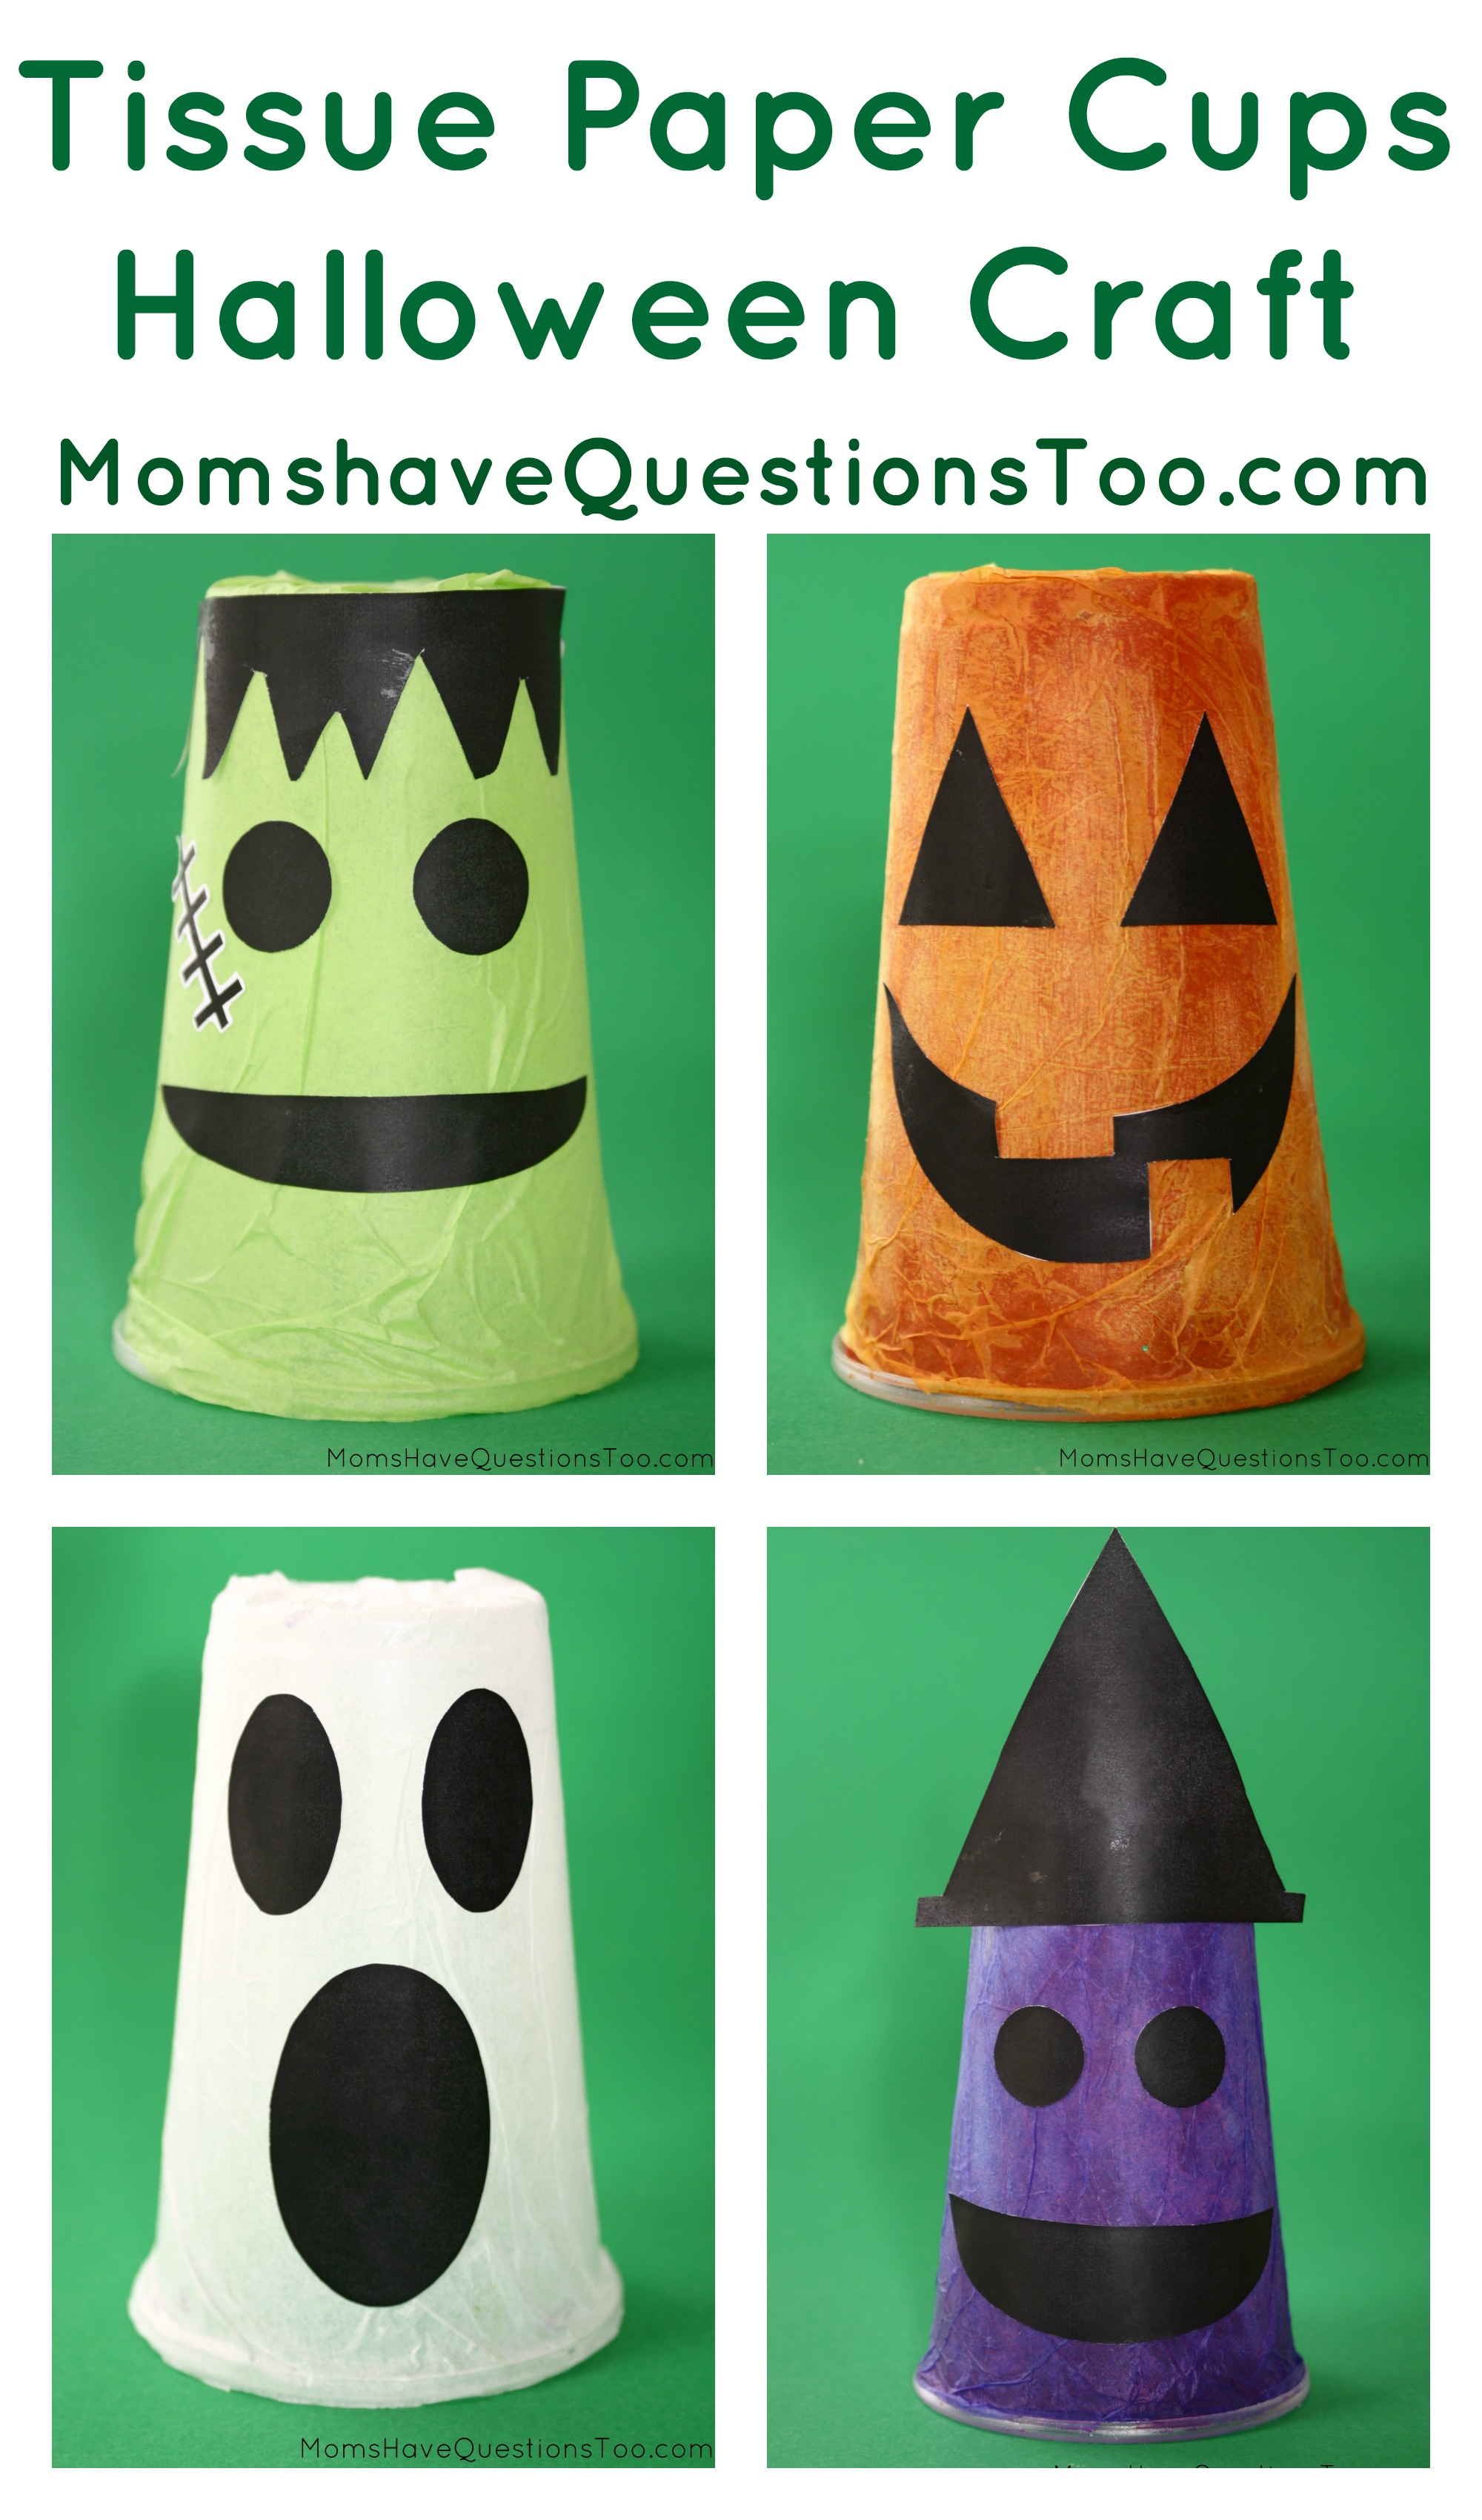 Spooky Solo Cup Halloween Craft